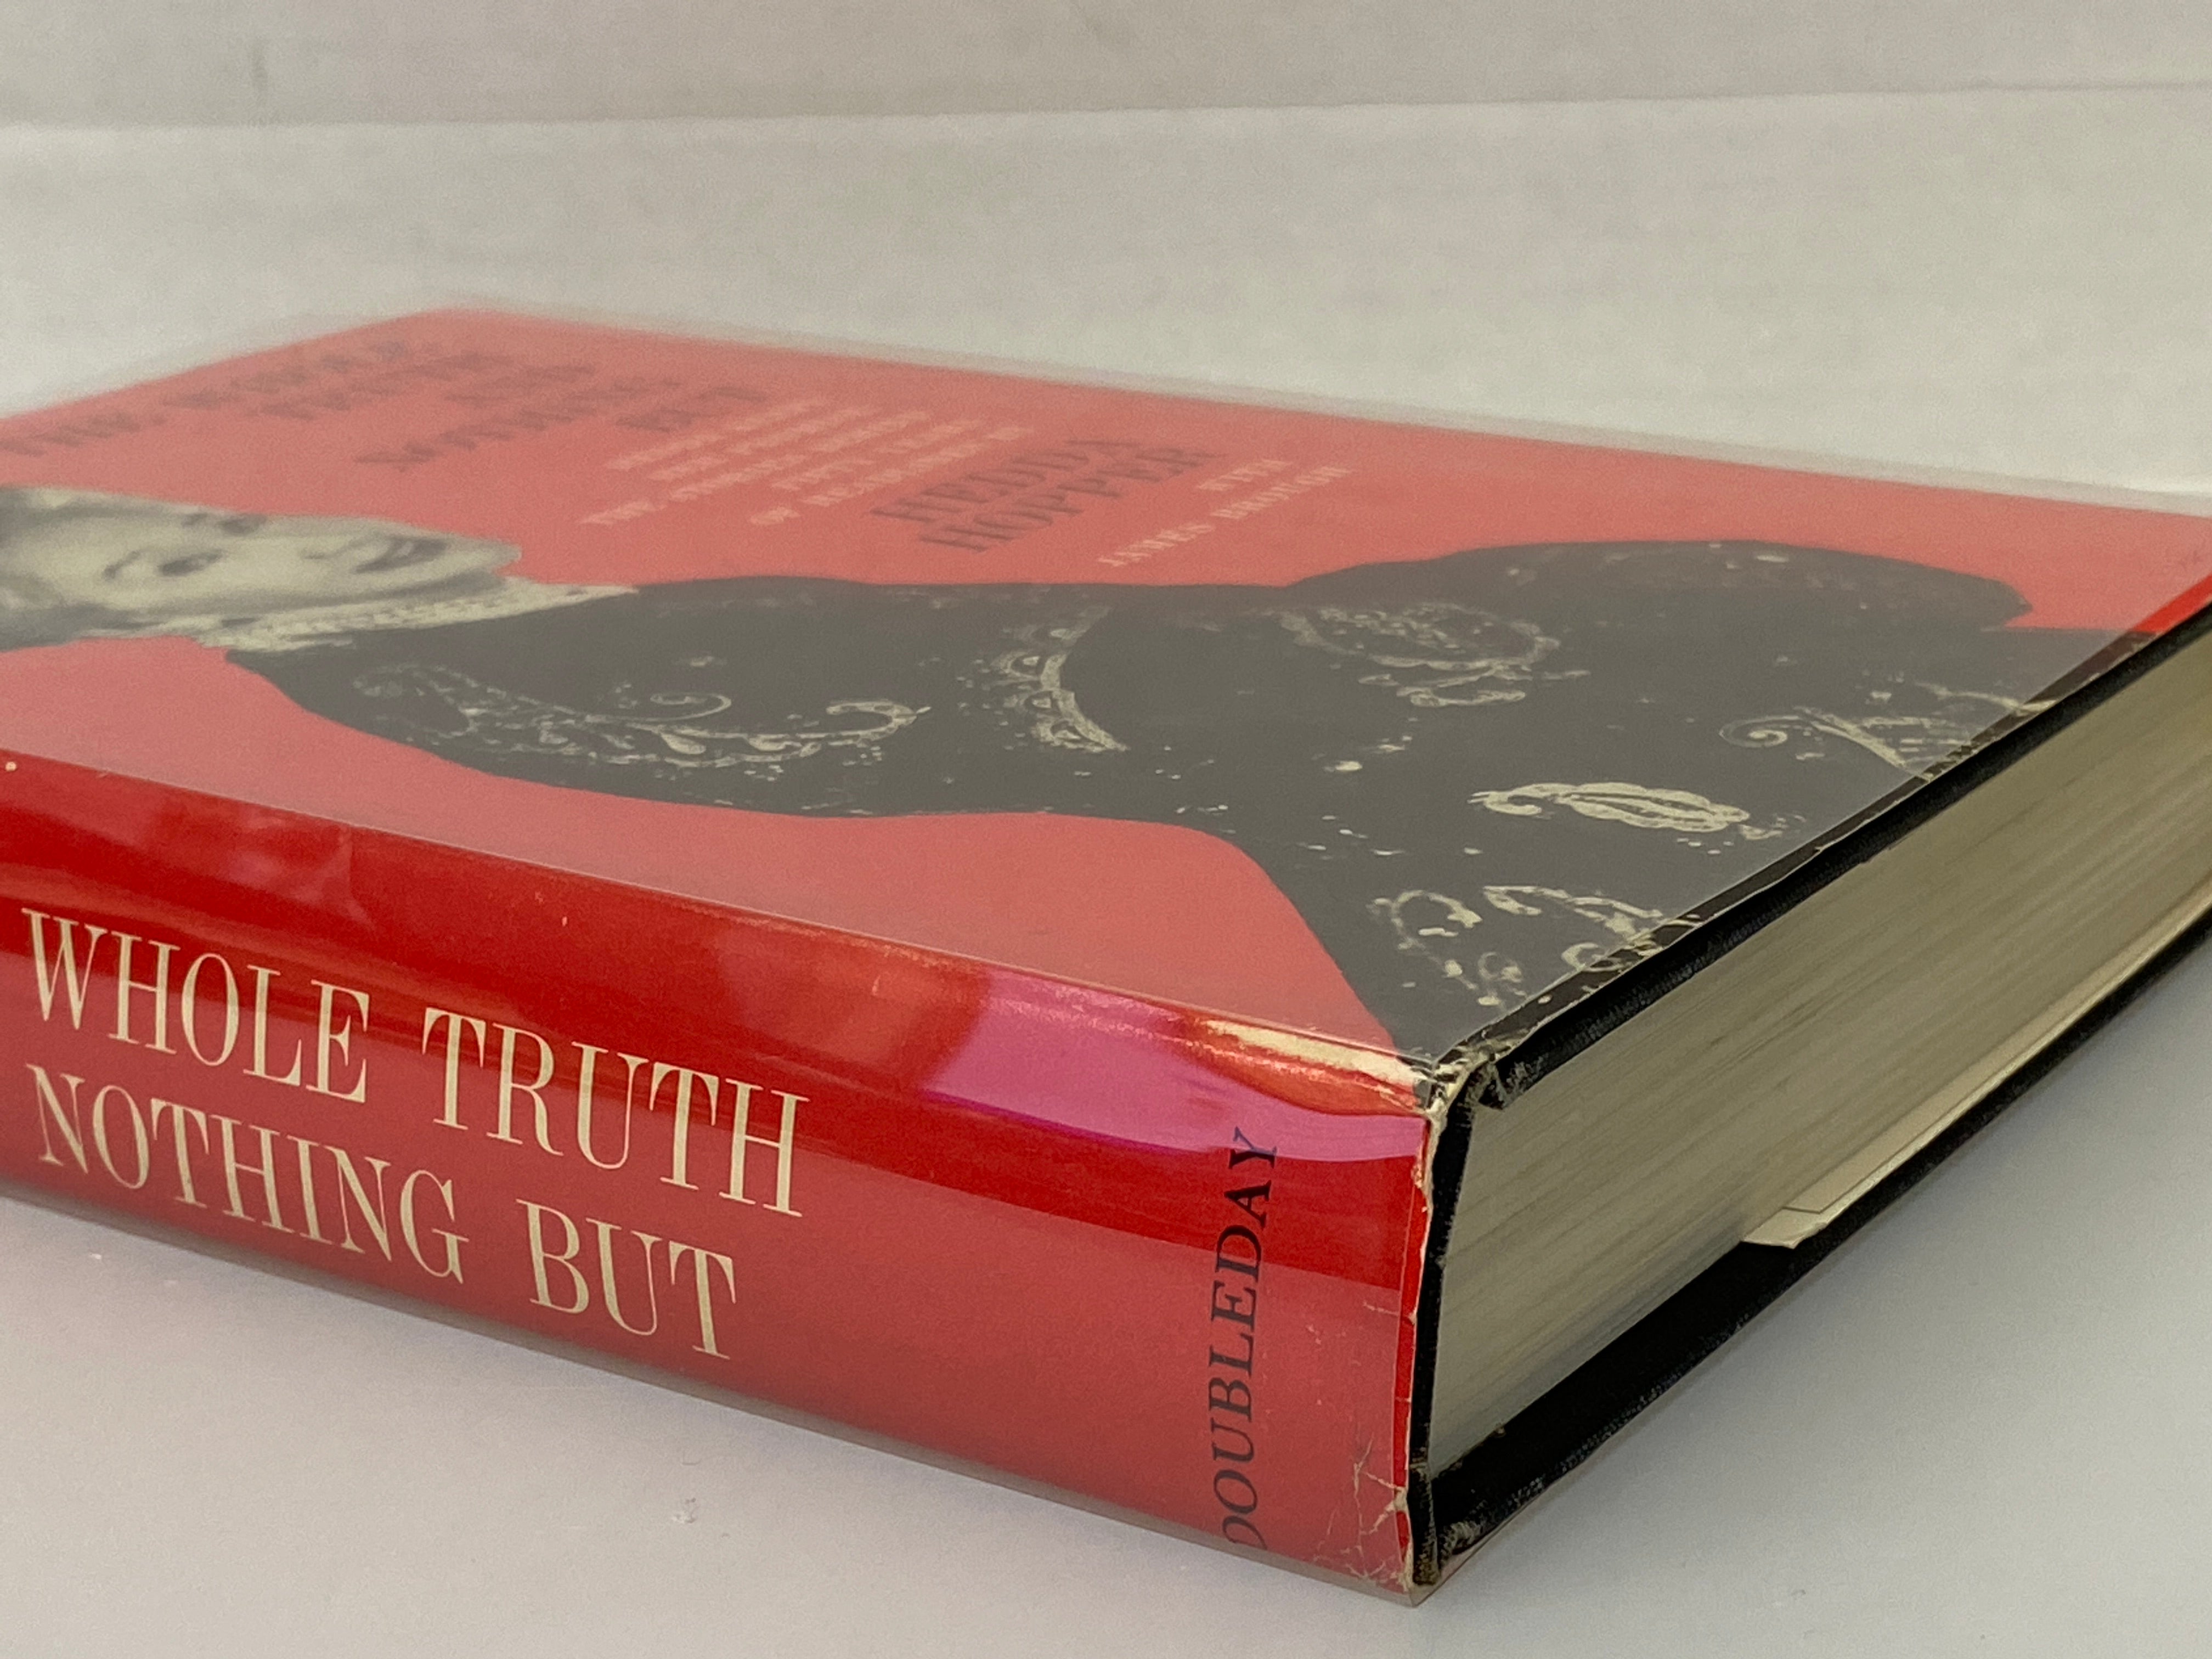 The Whole Truth and Nothing But by Hedda Hopper Inscribed First Edition 1963 HC DJ